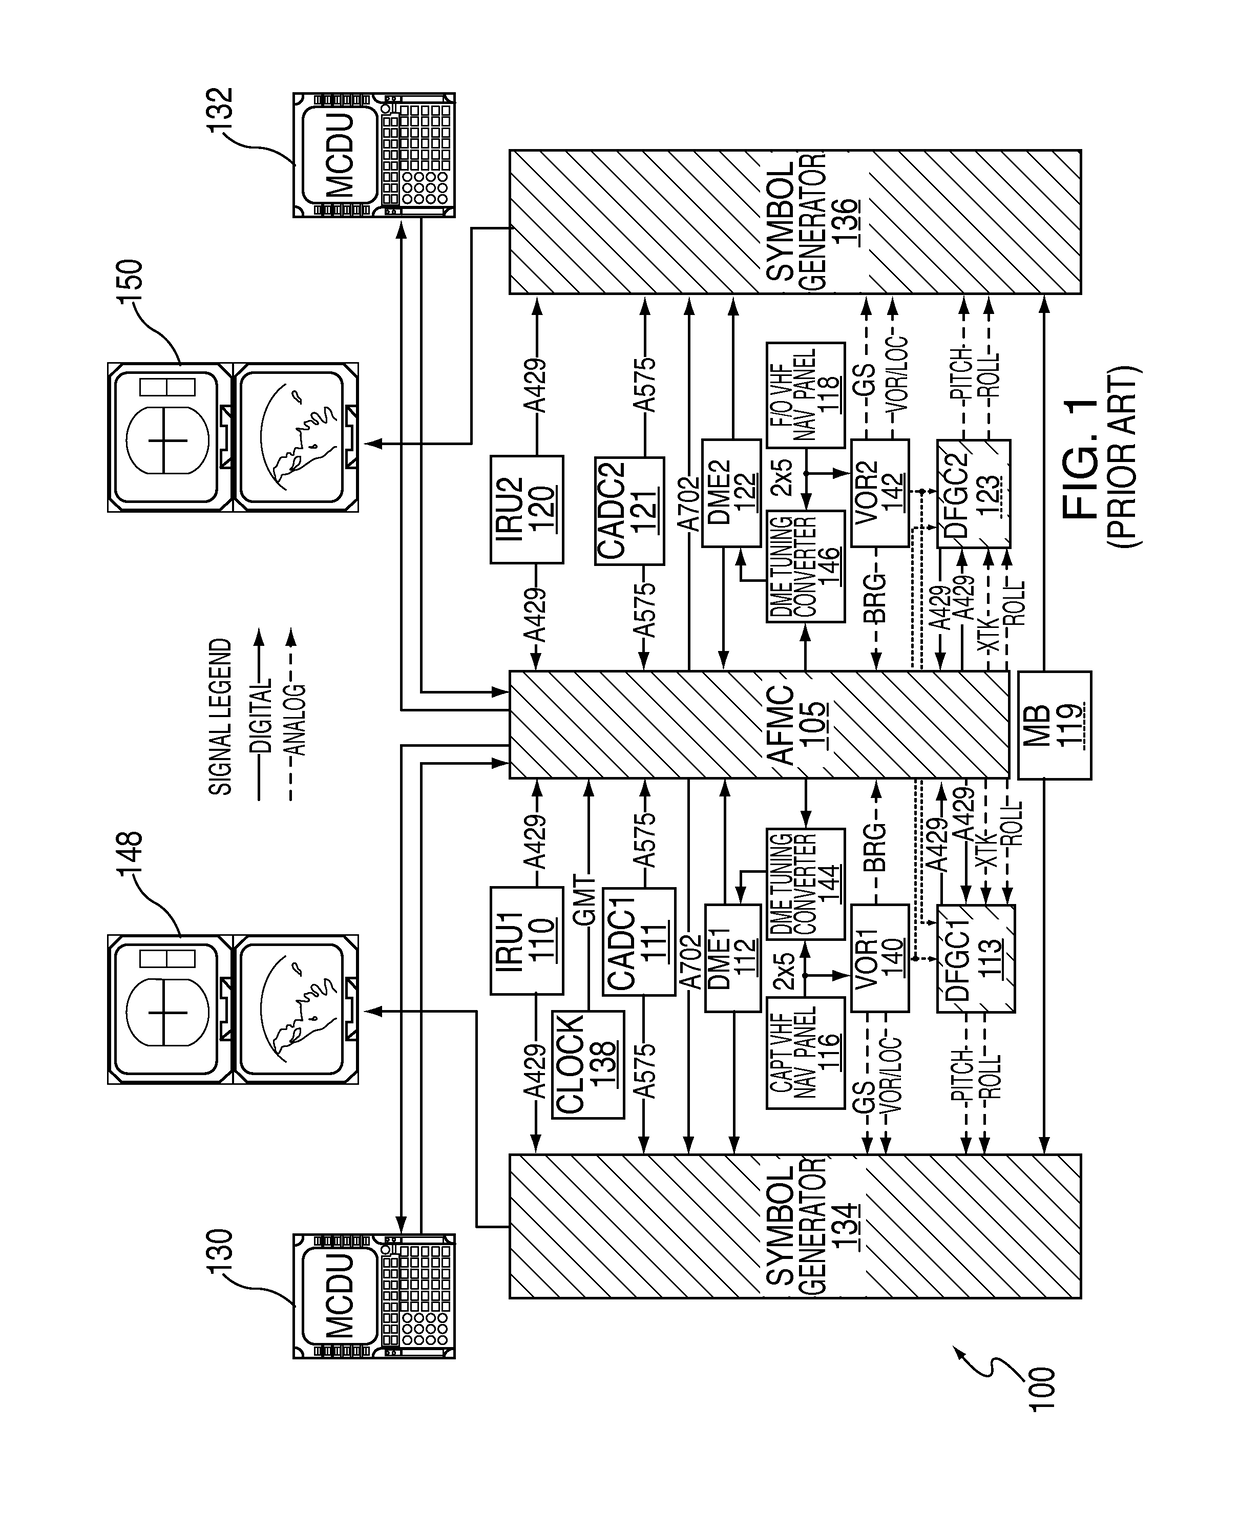 Upgrated flight management system for autopilot control and method of providing the same